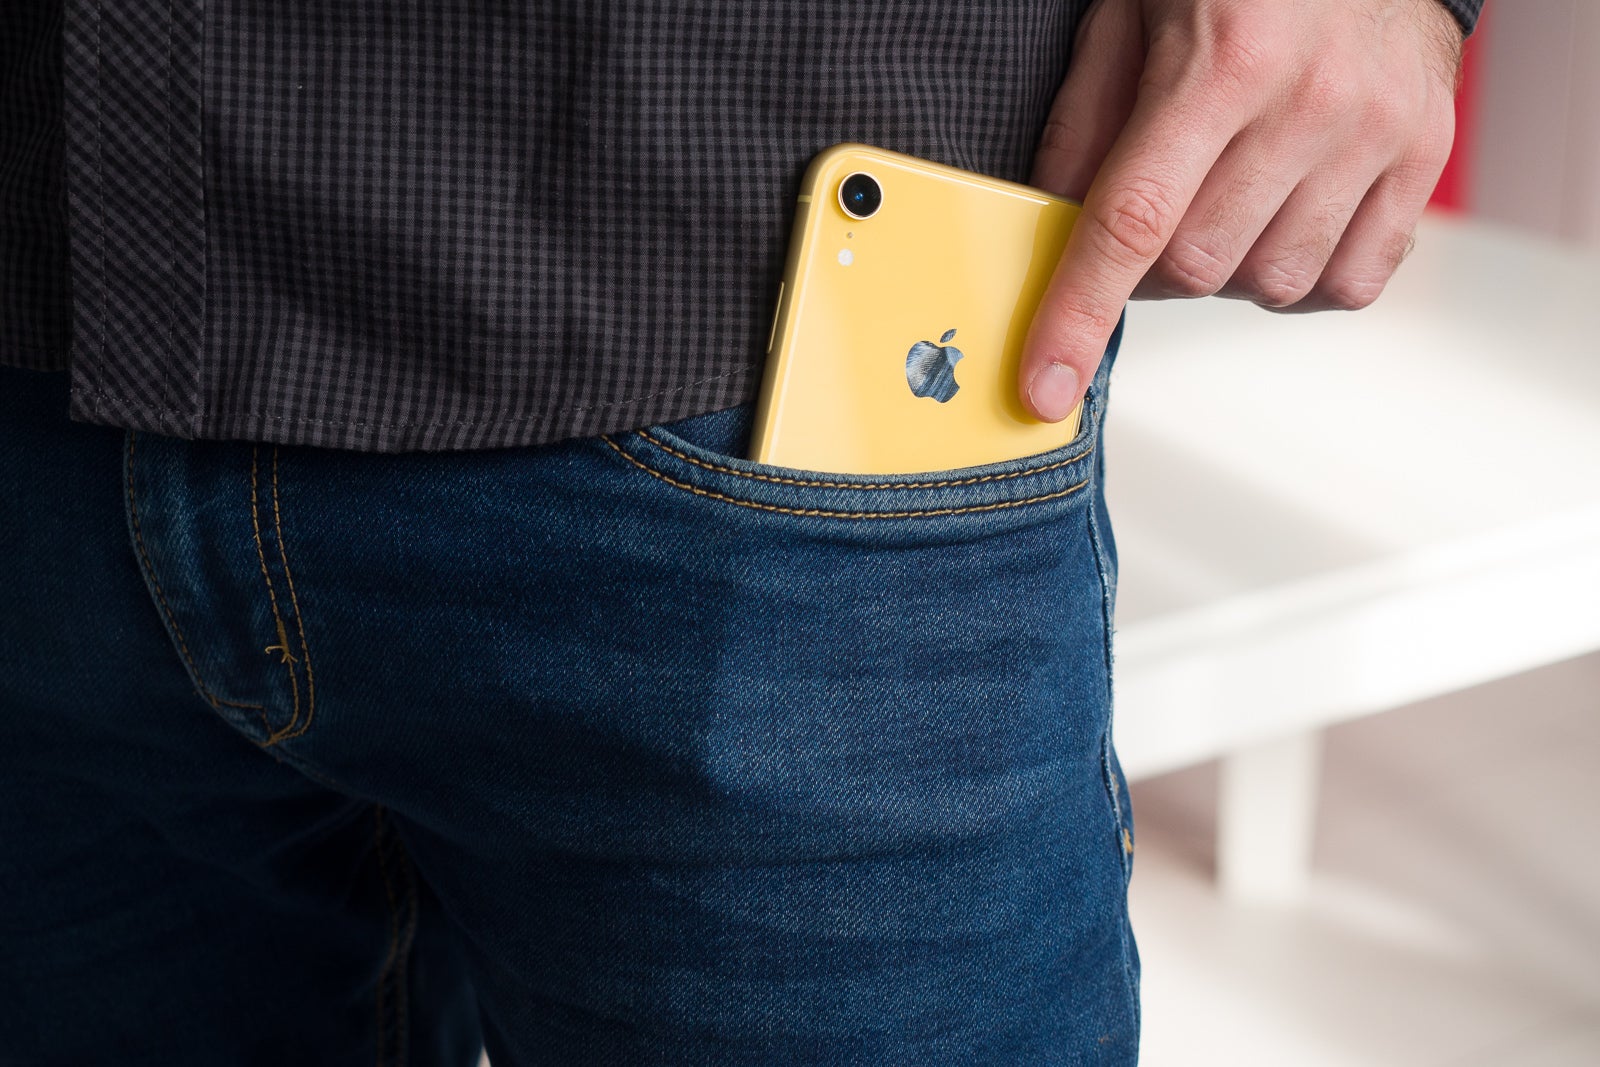 The iPhone XR slipped into many pockets, but not enough - Are Apple's services a new era for the company or just a filler before the next industry-changing product?